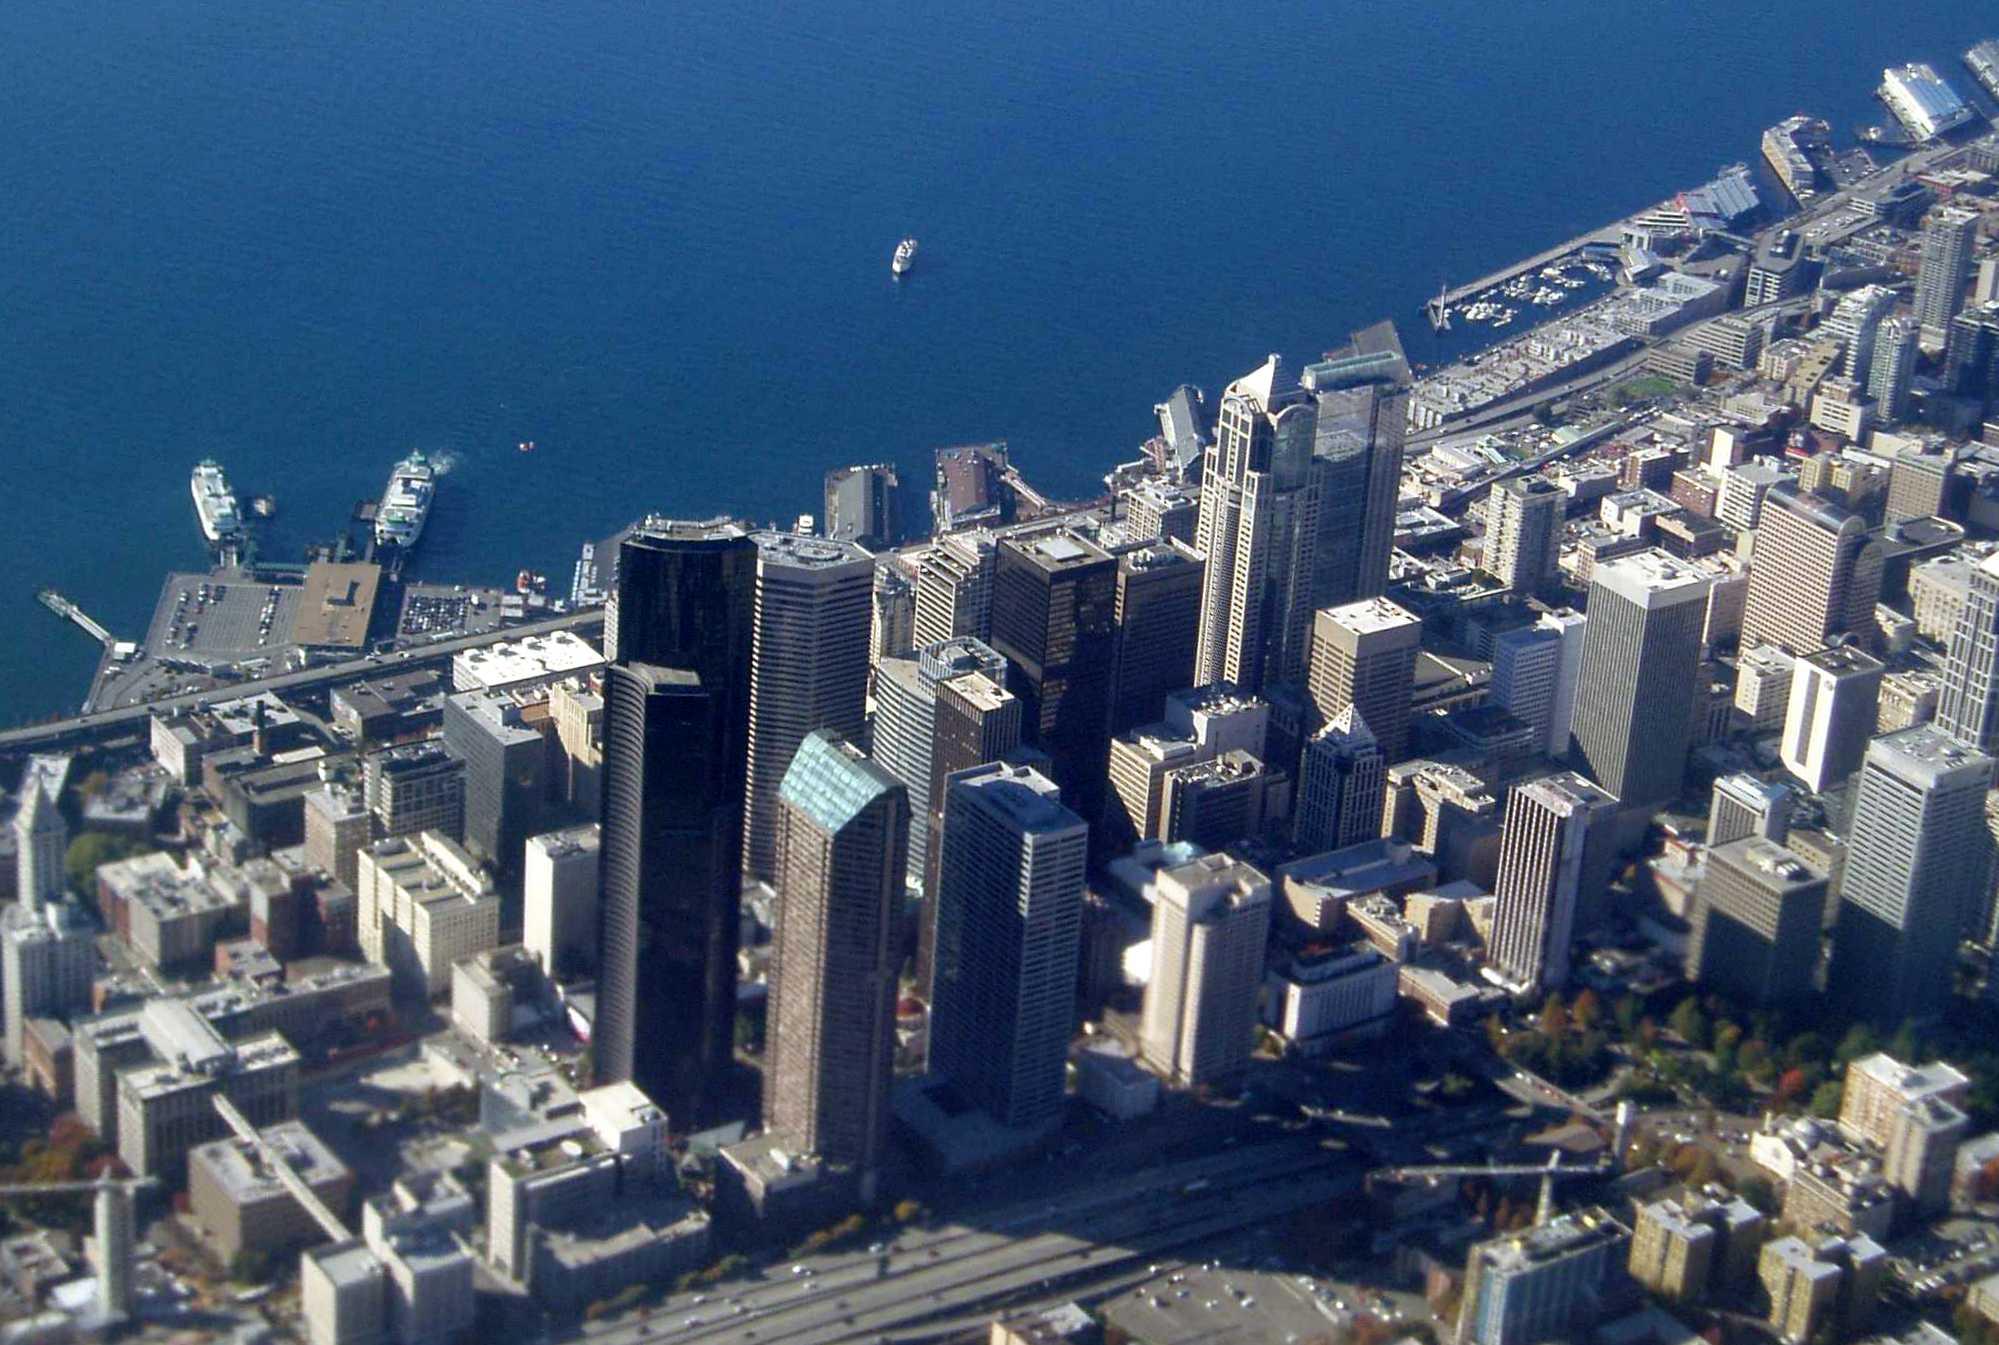 Skyscrapers in downtown Seattle and other Northwest city centers could sway more than anticipated in The Big One, according to research presented this week. CREDIT: TOM BANSE / NW NEWS NETWORK